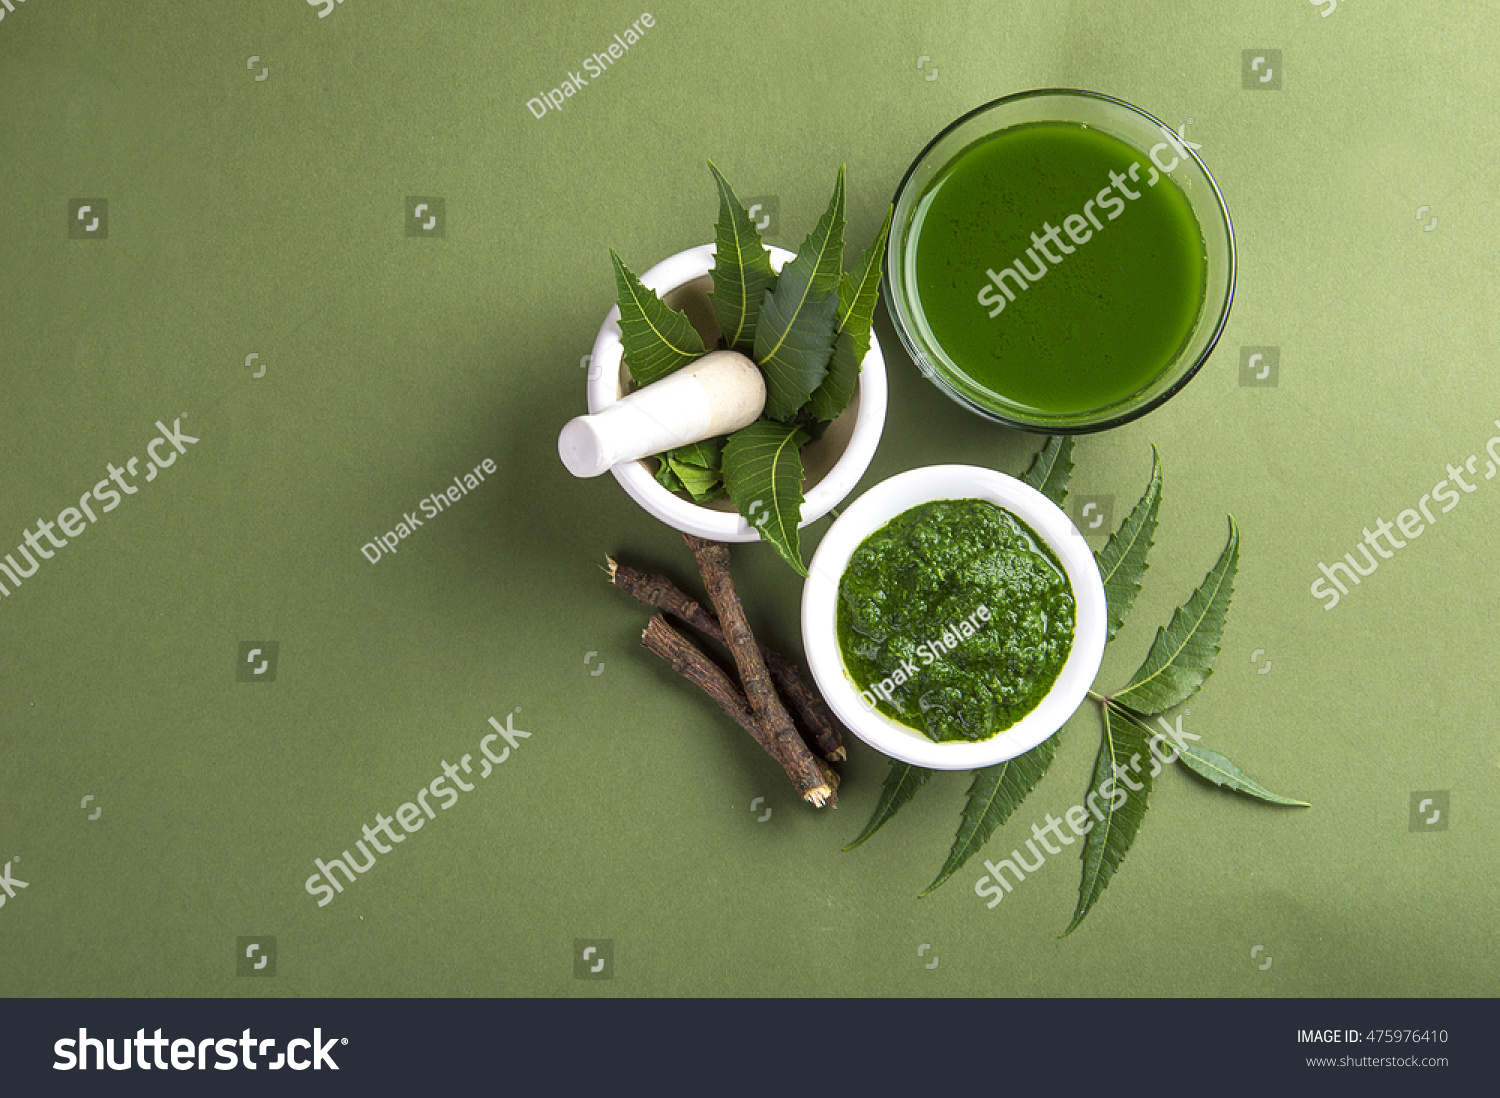 Medicinal Neem leaves in mortar and pestle with neem paste, juice and twigs on green background #475976410